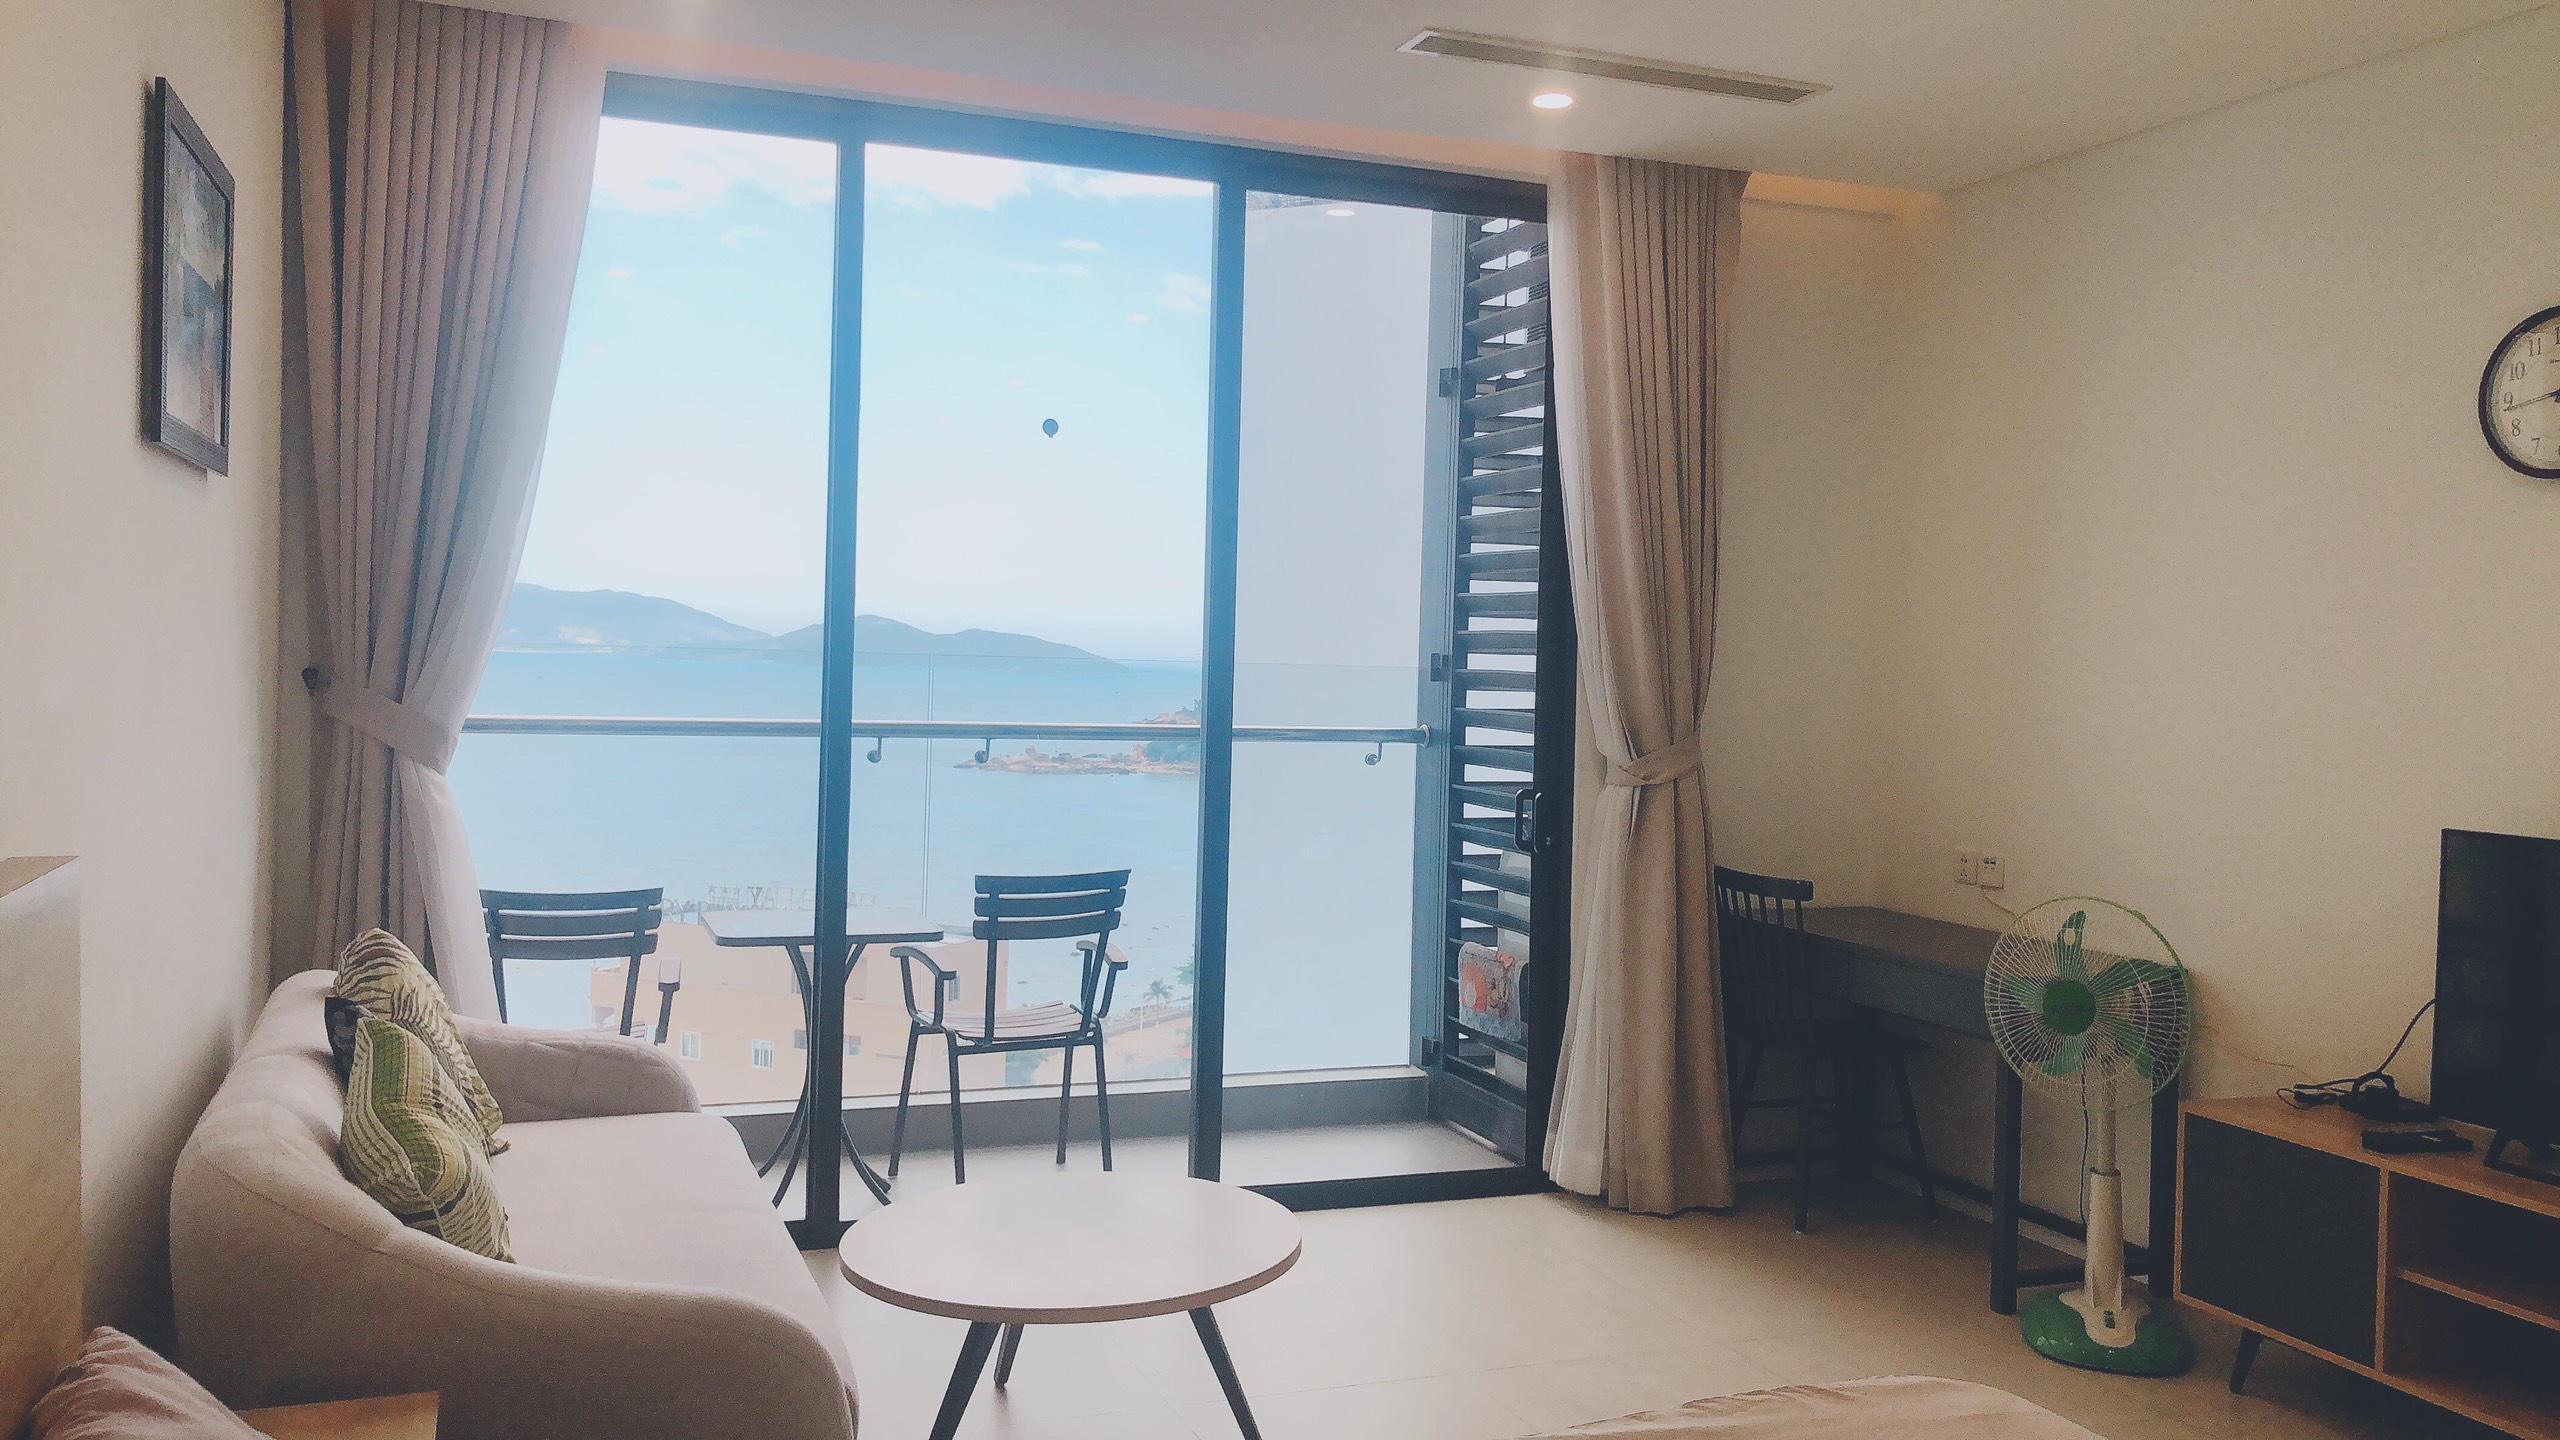 Scenia-Bay-Nha-Trang-for-rent-two-bedroom-5-2